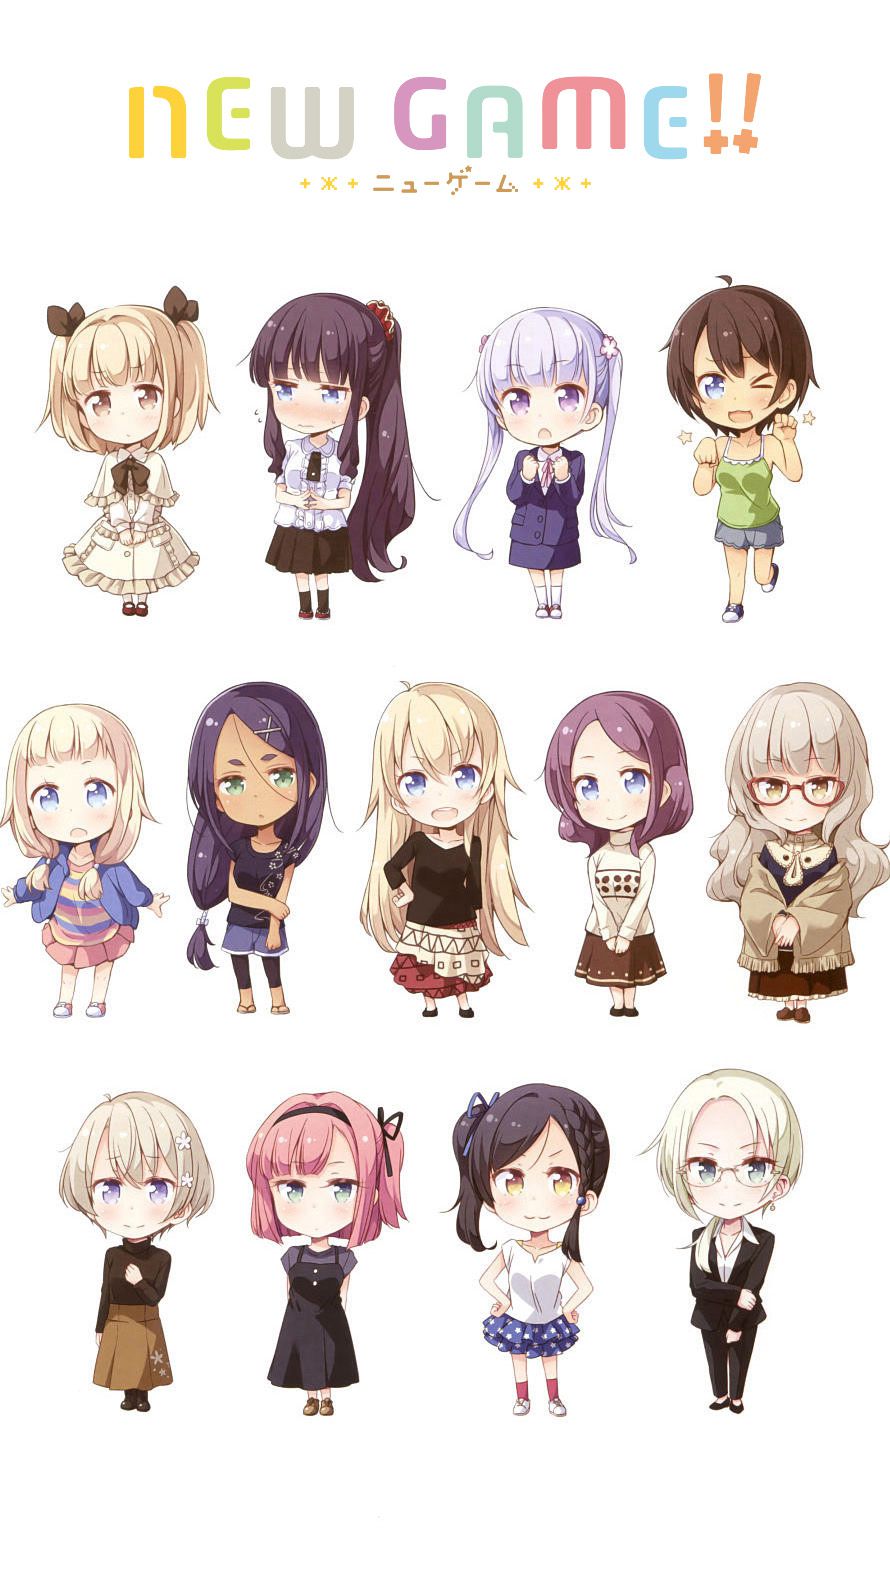 New Game ニューゲーム Iphone壁紙画像 Androidスマホ壁紙 51 アニメ壁紙ネット Pc Android Iphone壁紙 画像